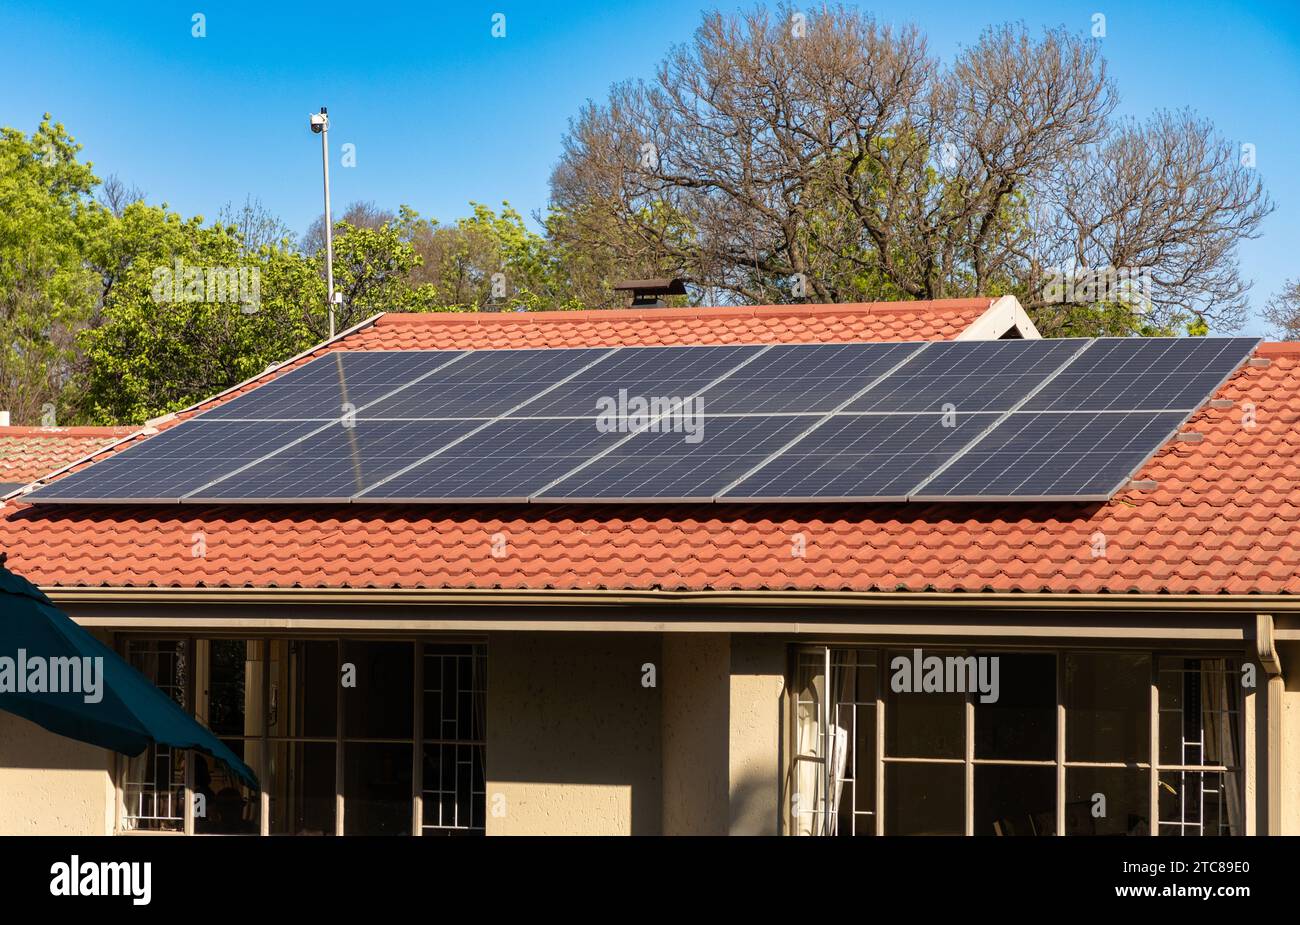 Solar panels, aimed at mitigating 'load-shedding' or blackouts, are seen on a residential roof in a suburb of Johannesburg, South Africa Stock Photo